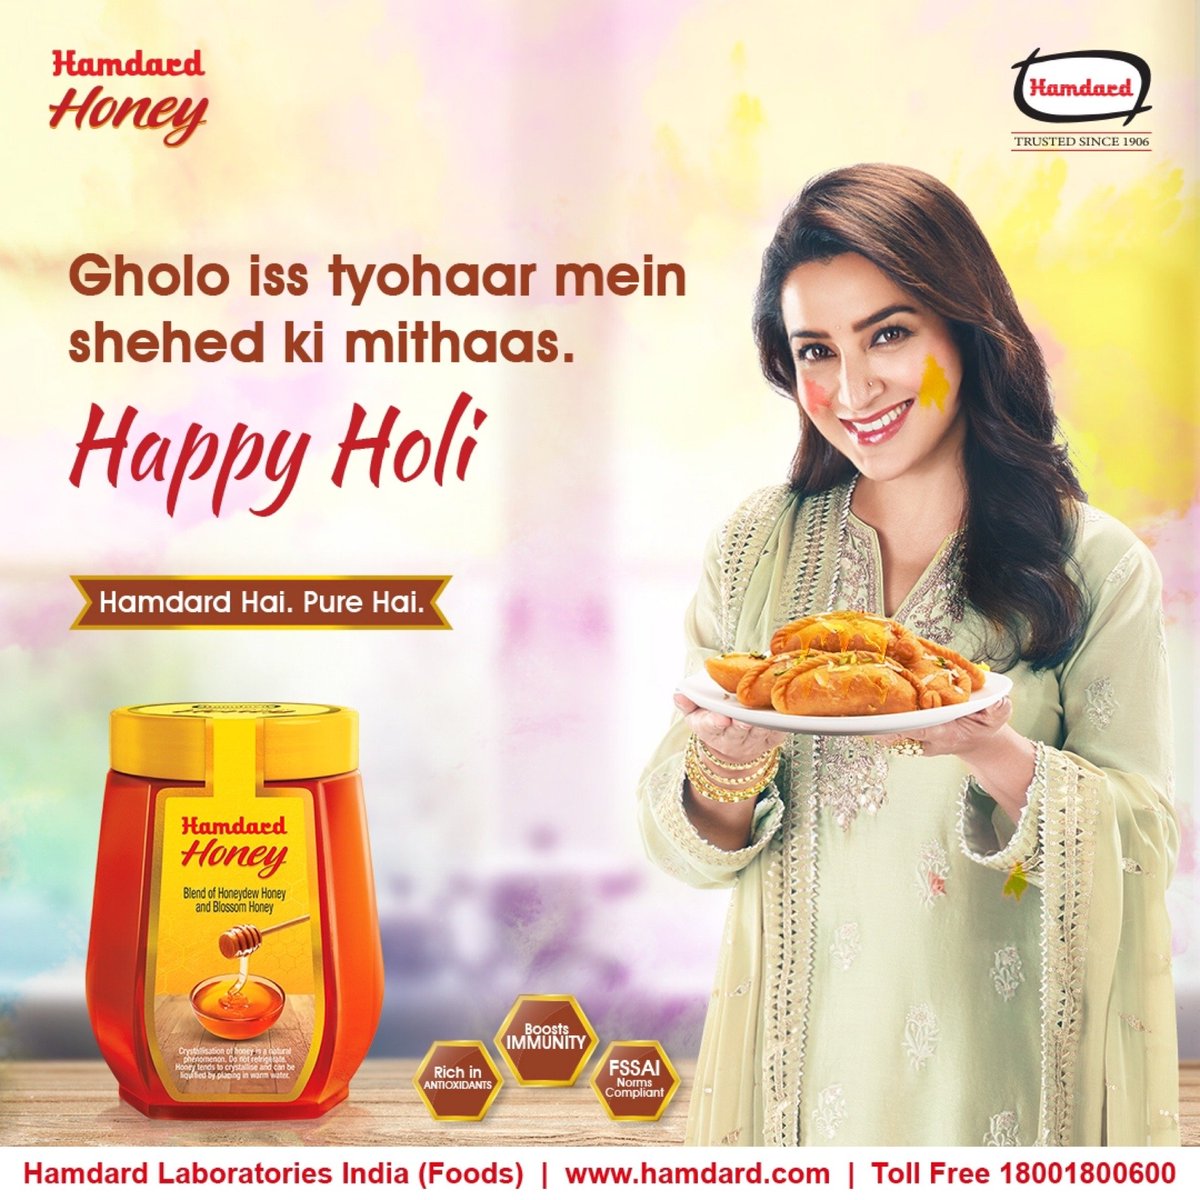 Here’s wishing that this Holi showers your life with immense happiness, purity, and health. Have a cheerful and safe Holi! #HappyHoli #Hamdard #HamdardFoods #HamdardHoney #Honey #HappyHoli2023 #Holi #Sweets #Gujia #HamdardHaiPureHai #Colours #Topical #Festive